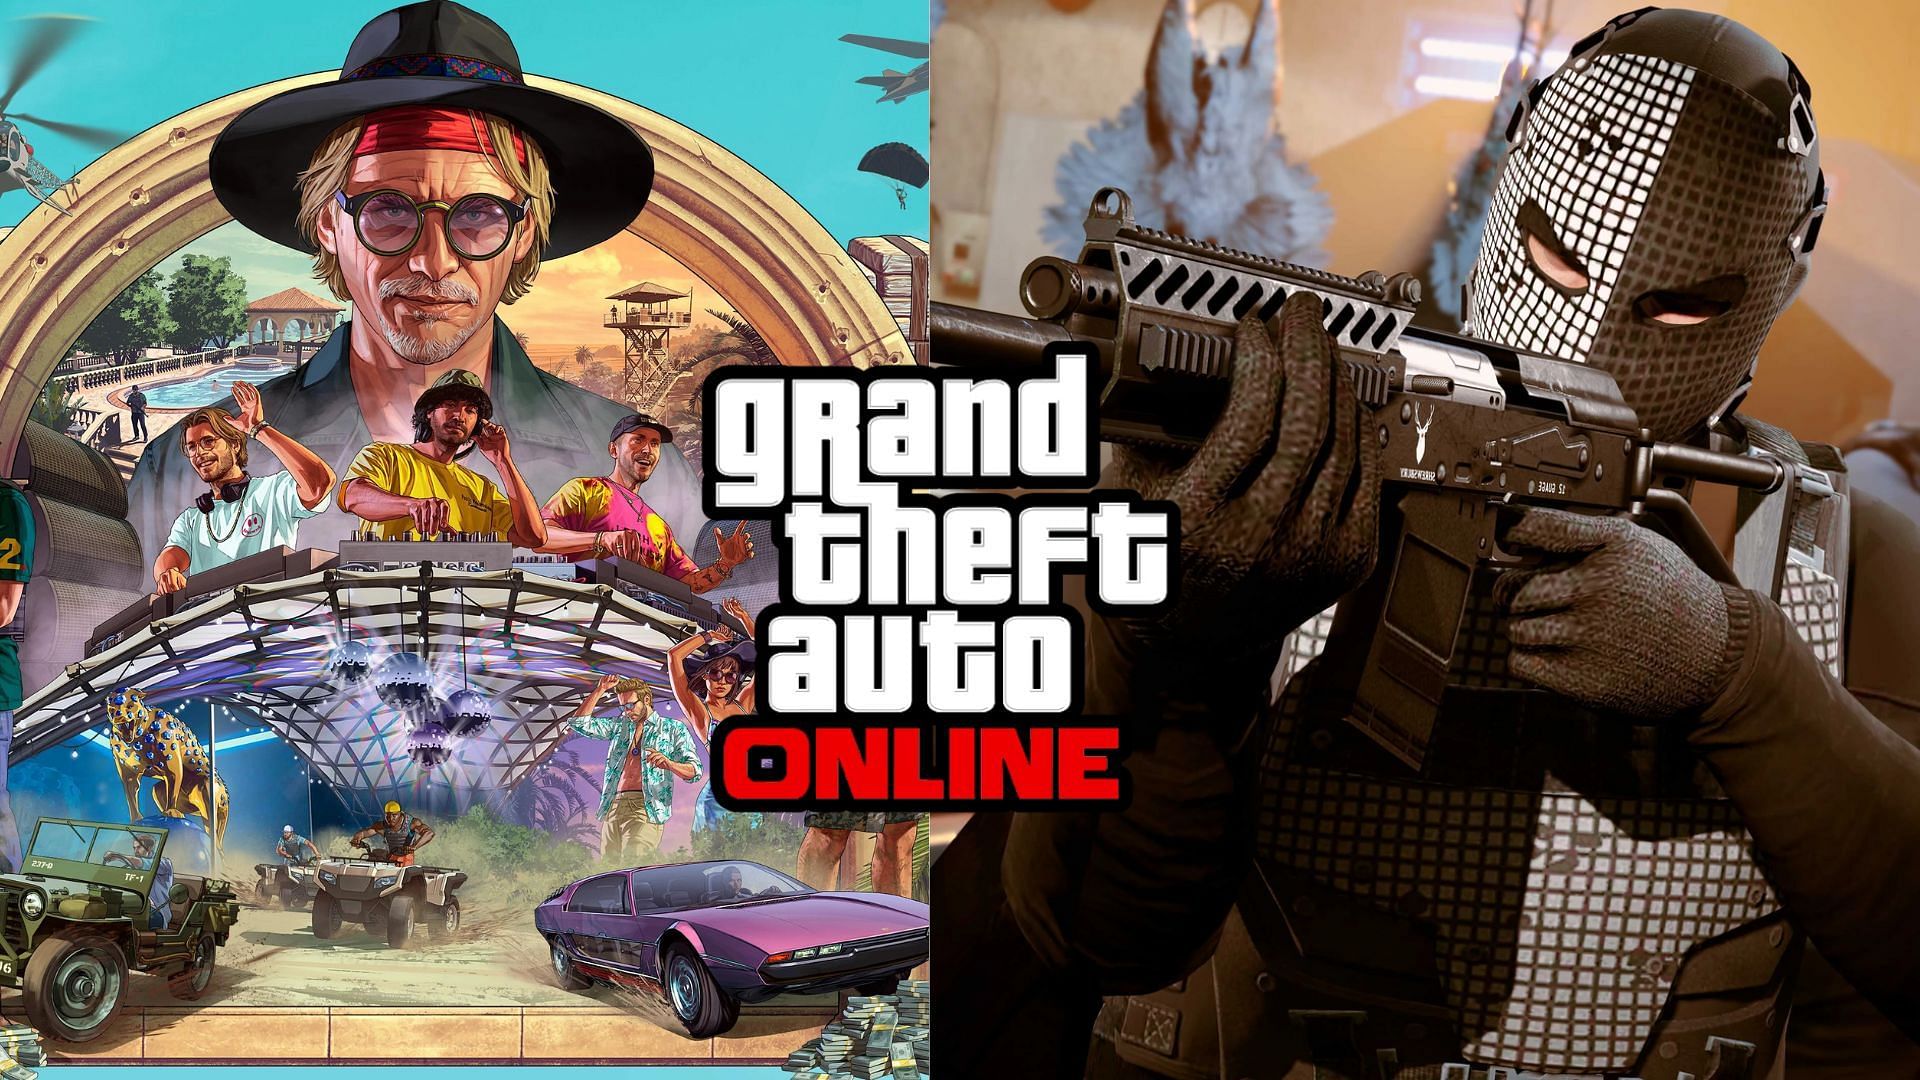 missions in GTA 5 Online for earning money solo